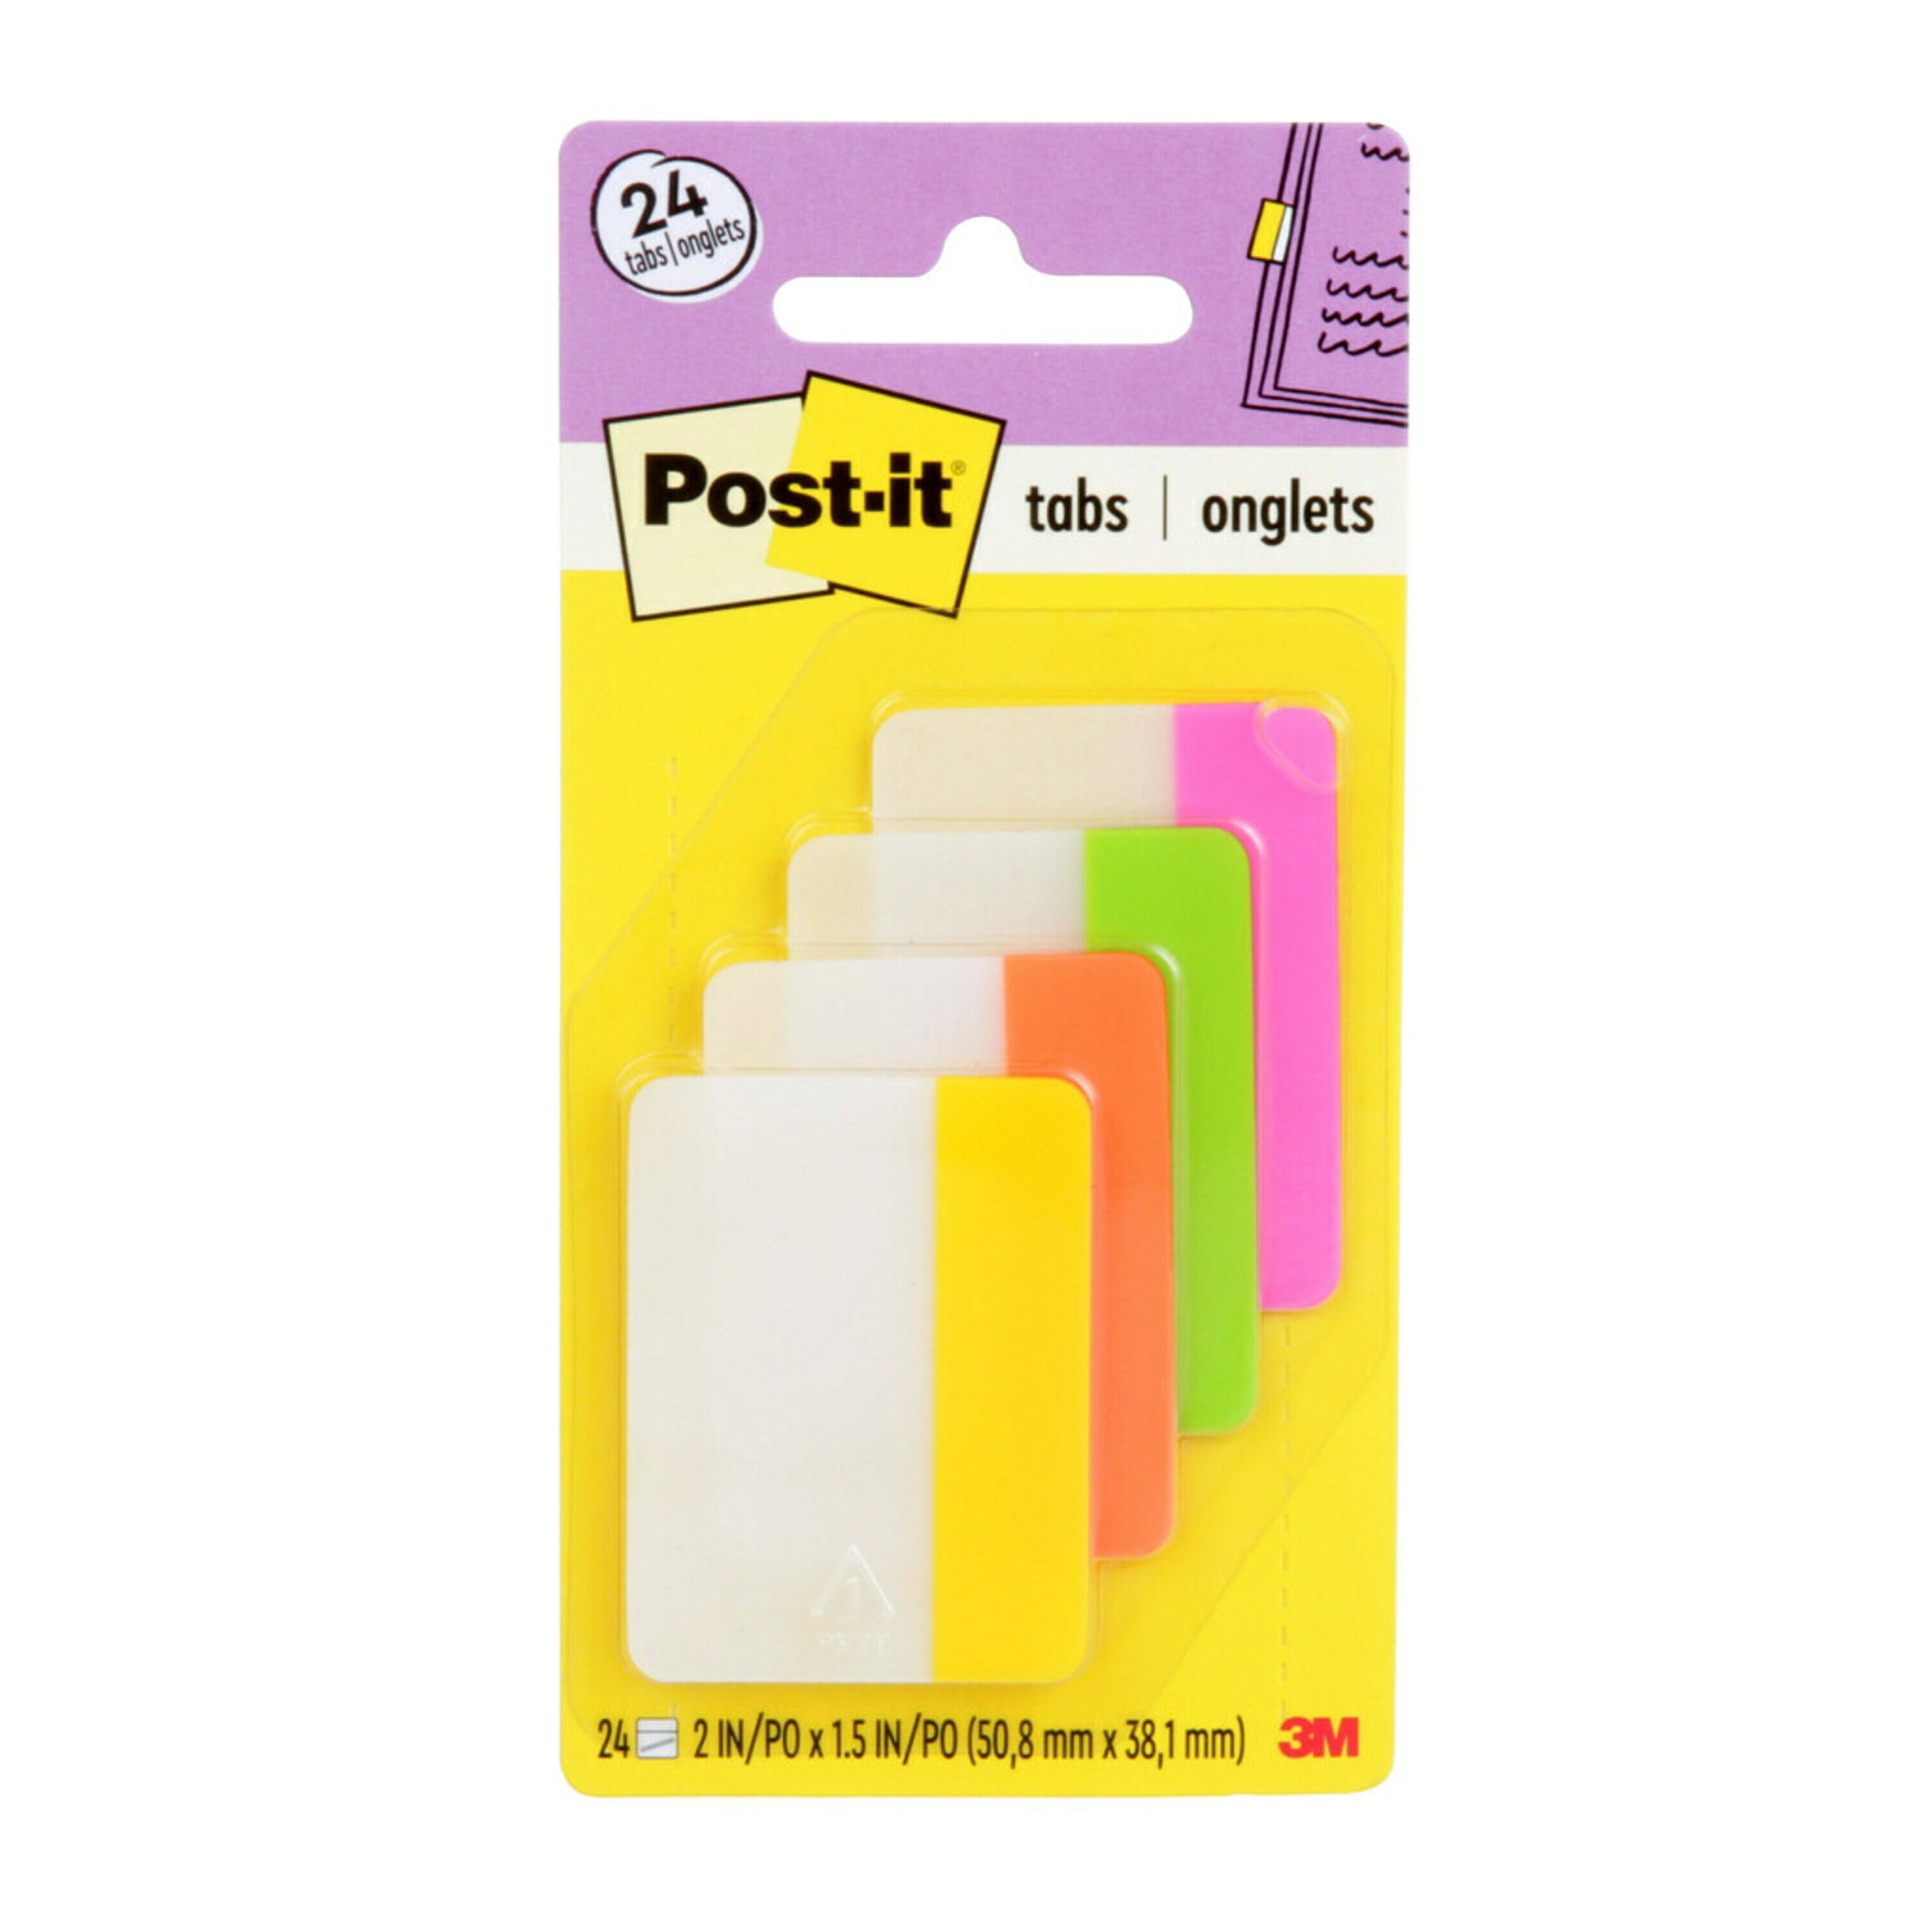 KICNIC Page Markers Sticky Index Tabs 750 Pcs, Arrow Flag Tabs Self  Adhesive, Sticky Notes for Page Marking and Highlighting [3 Designs, 10  Colors]